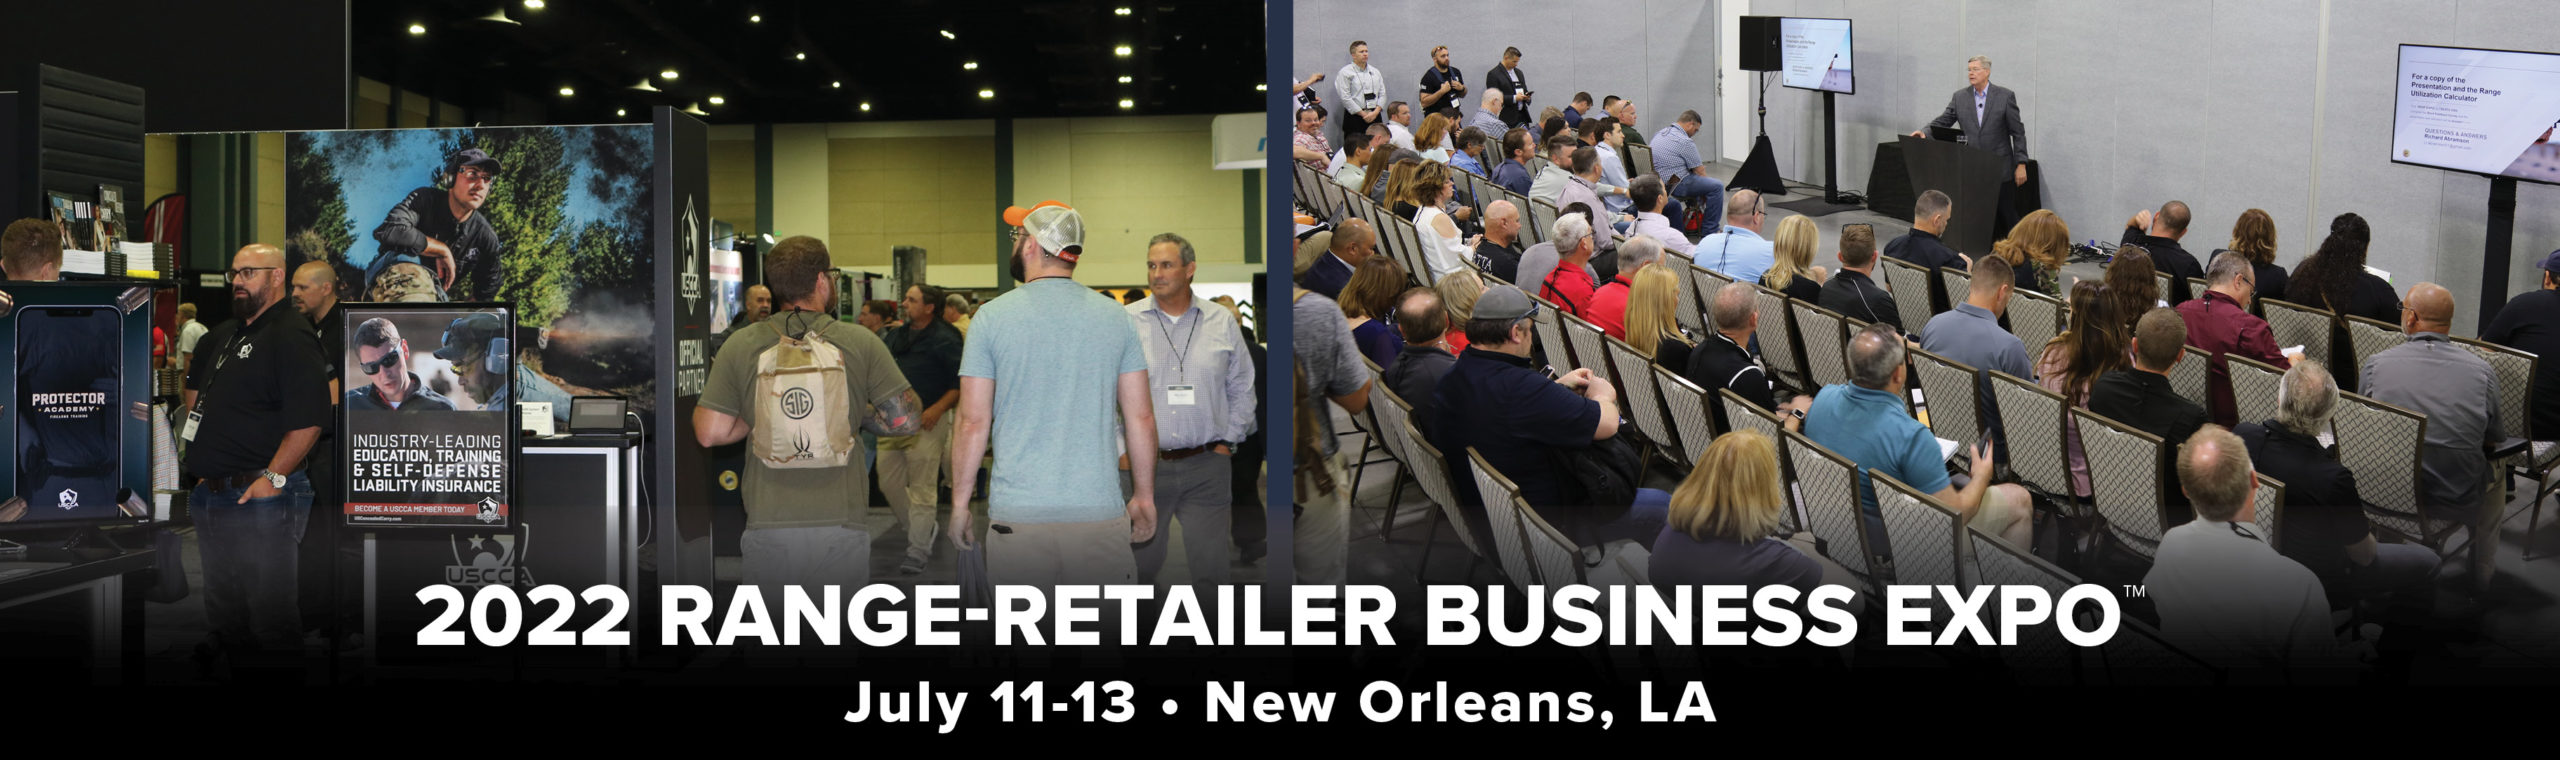 2022 NSSF Range-Retailer Business Expo | July 11-13 | New Orleans, LA